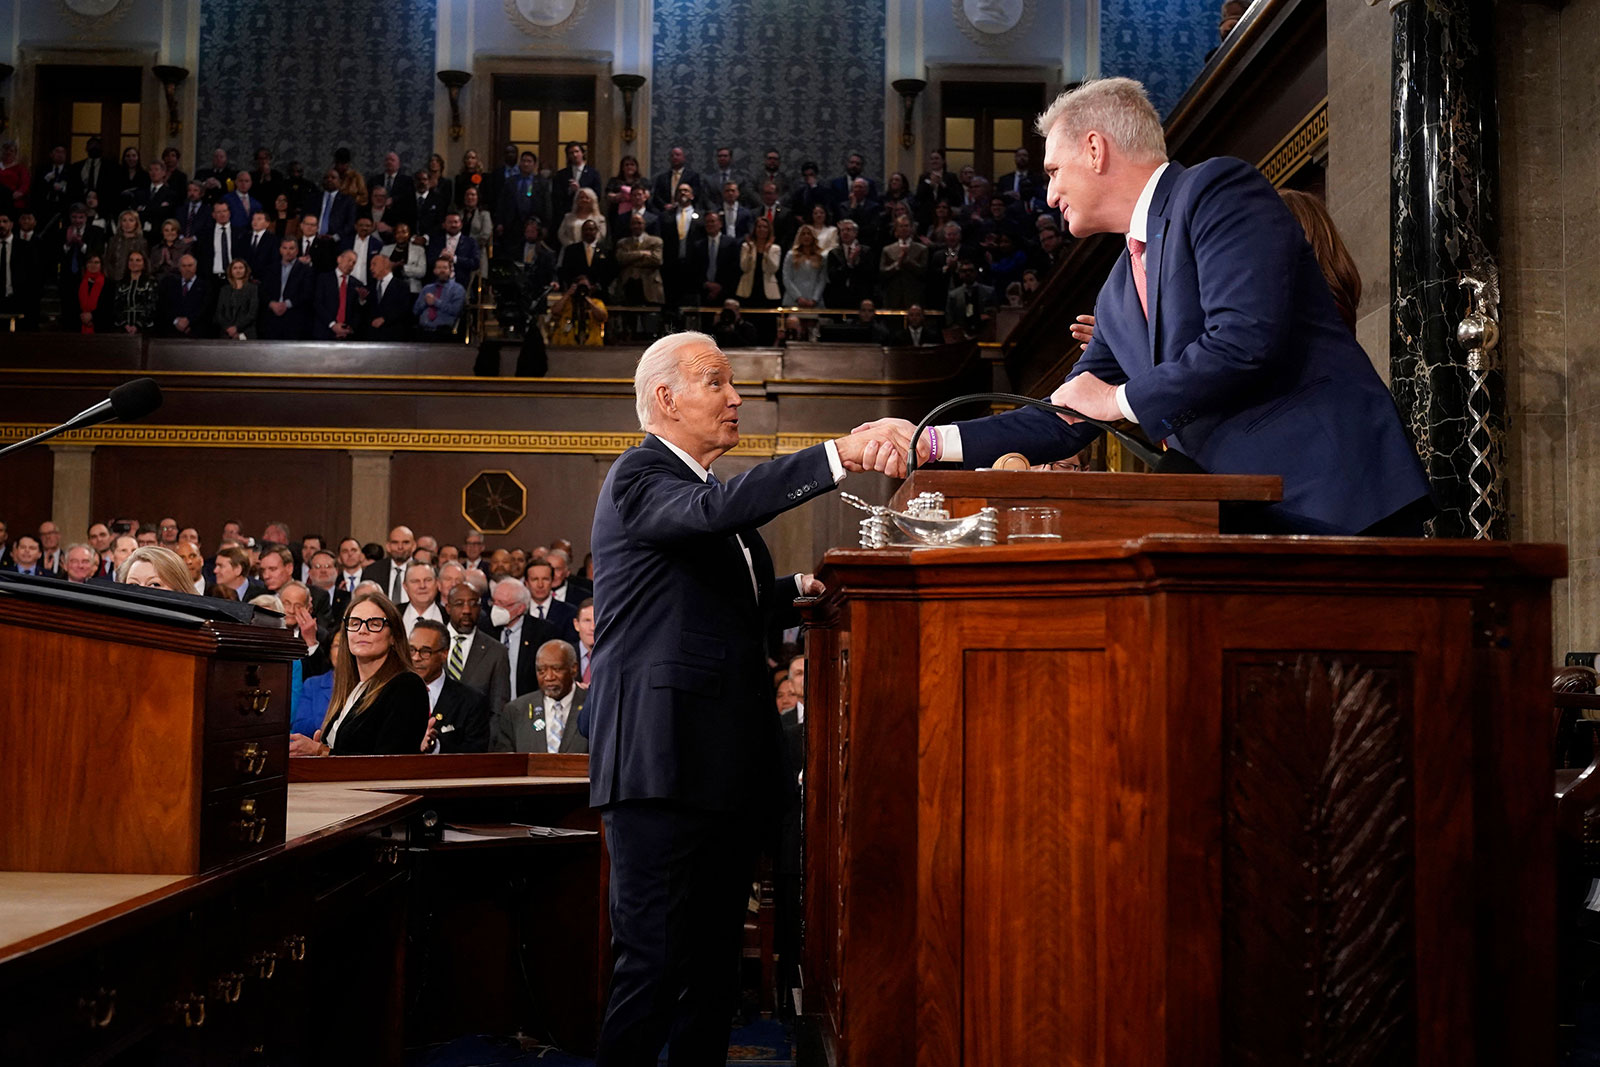 Biden shakes hands with House Speaker Kevin McCarthy.